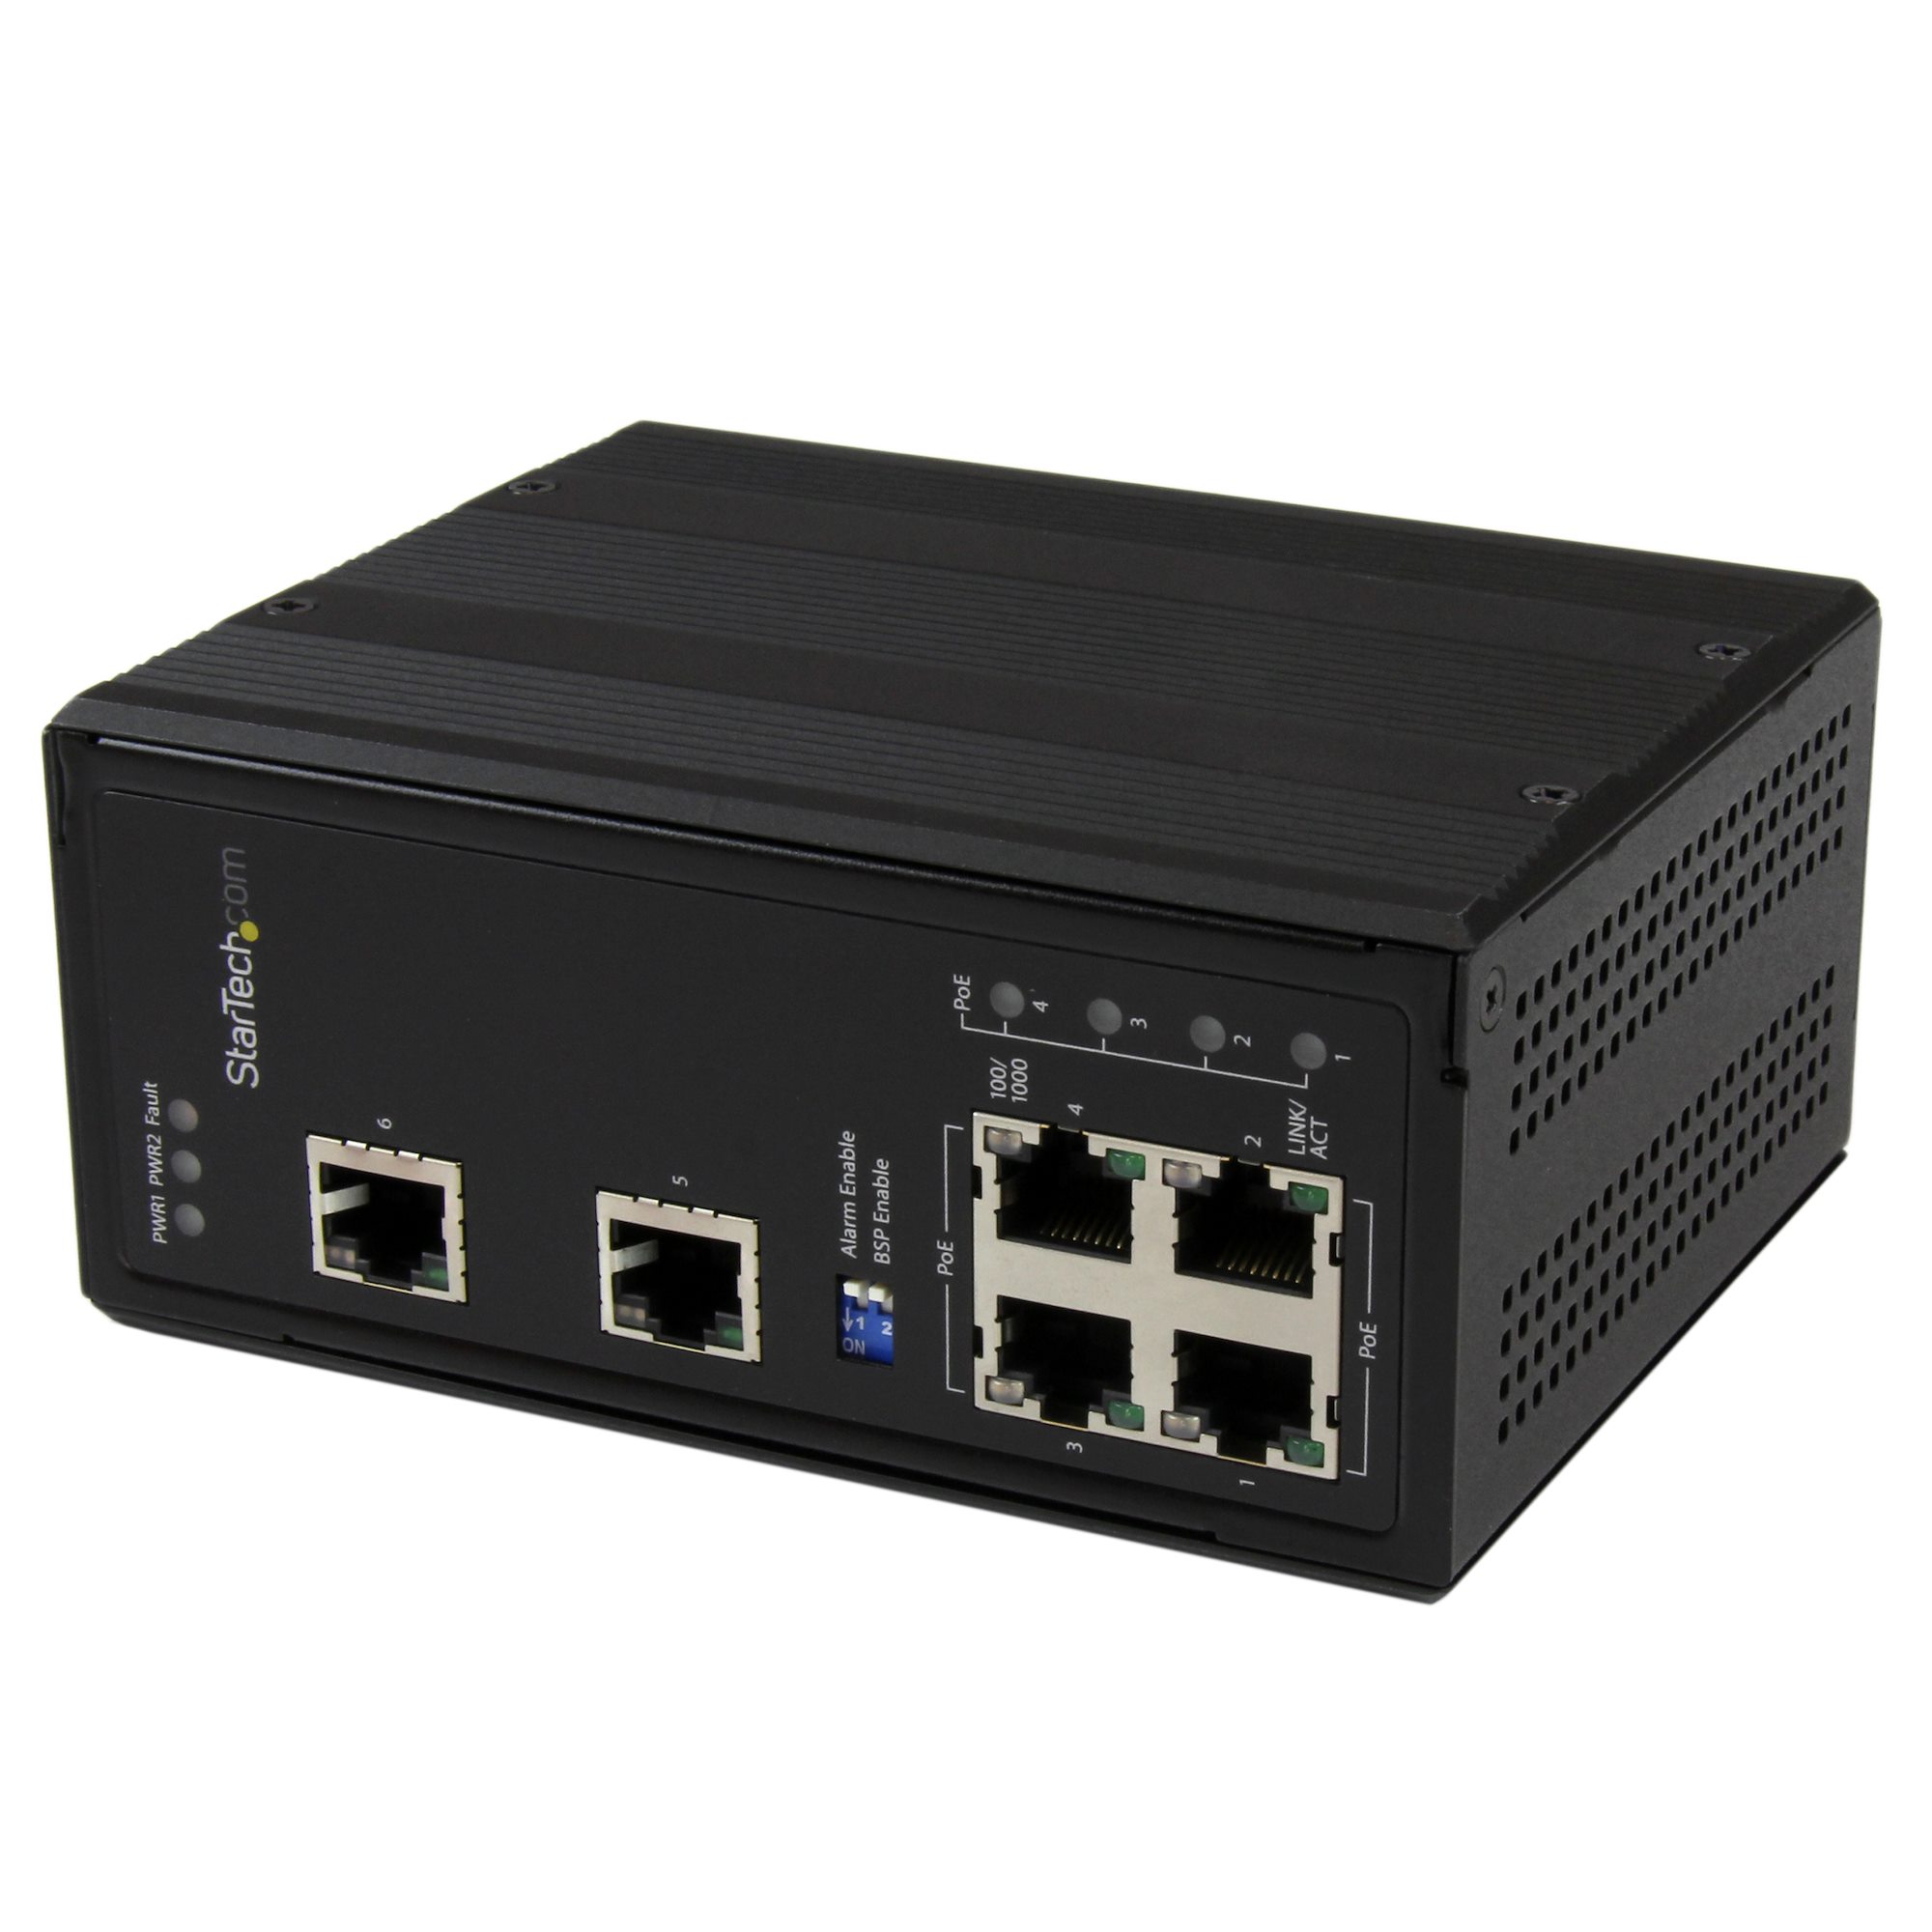 6 Port Unmanaged Industrial Gigabit Ethernet Switch w/ 4 PoE+ Ports and  Voltage Regulation - DIN Rail / Wall-Mountable